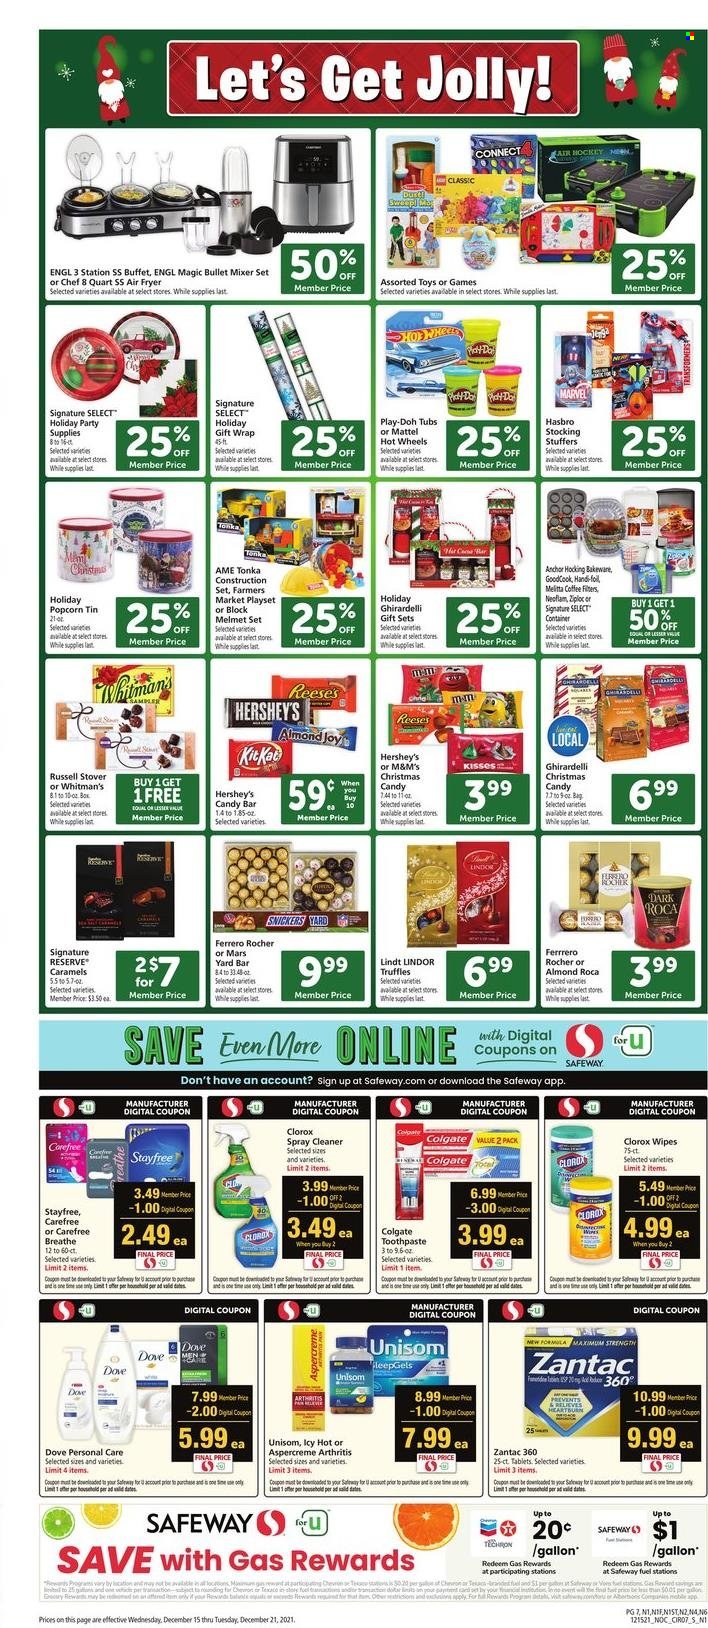 thumbnail - Safeway Flyer - 12/15/2021 - 12/21/2021 - Sales products - Anchor, Reese's, Hershey's, Lindt, Lindor, Ferrero Rocher, Snickers, Mars, truffles, M&M's, Ghirardelli, popcorn, rice, coffee, wipes, cleaner, Clorox, Joy, Dove, Colgate, toothpaste, Stayfree, Carefree, Ziploc, bakeware, container, gift wrap, party supplies, Mattel, play set, Play-doh, Hasbro, toys, Hot Wheels, air hockey table, Unisom, Zantac, Aspercreme. Page 7.